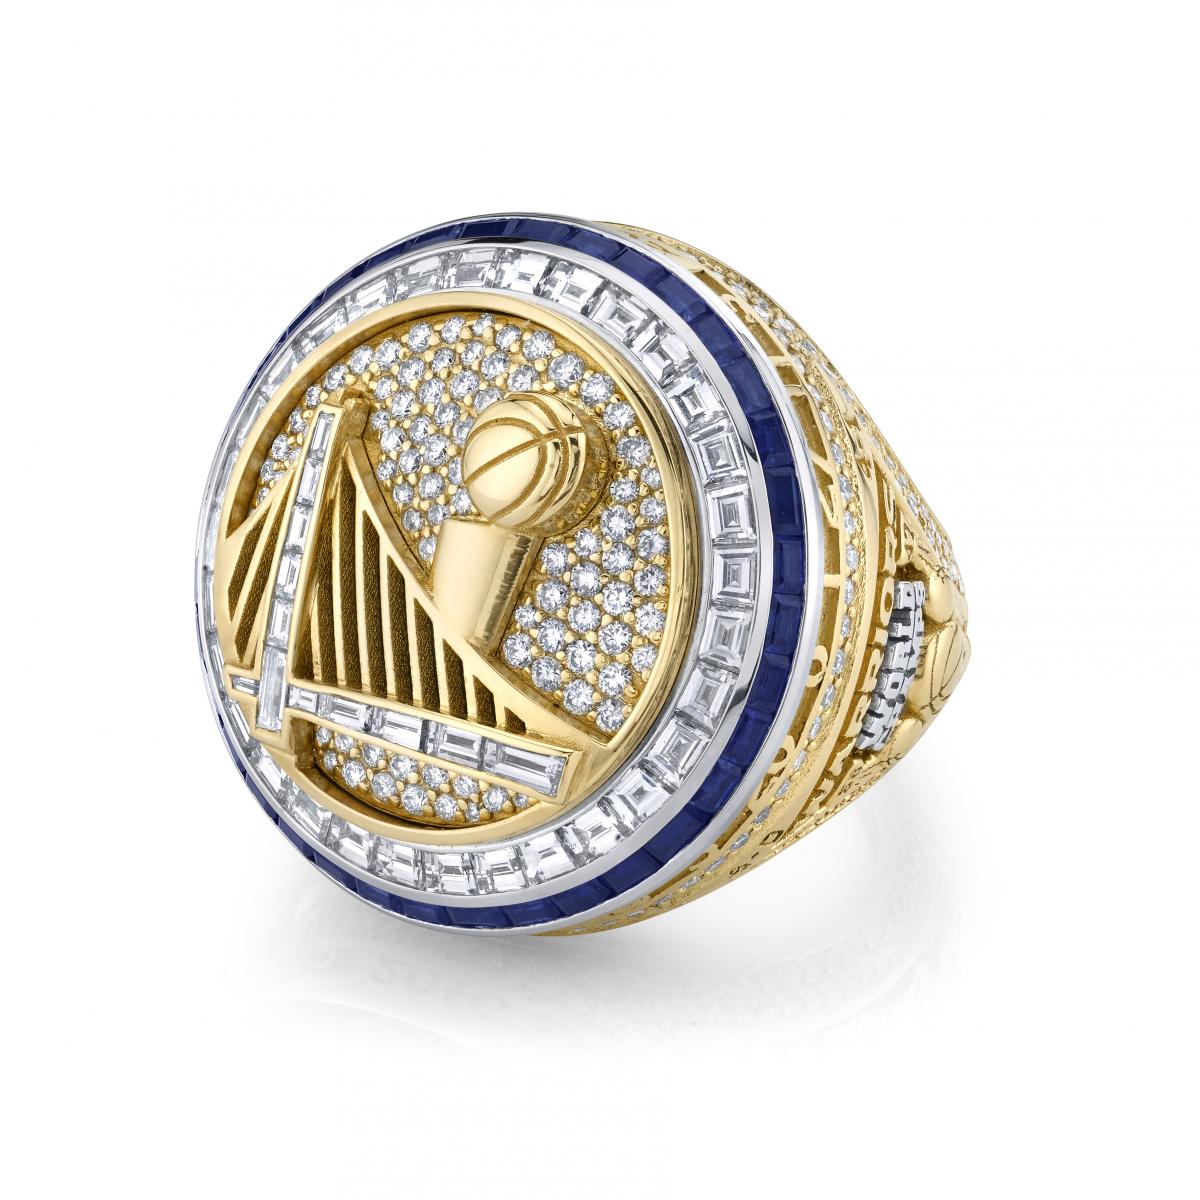 Golden State Warriors Receive Nba Championship Rings